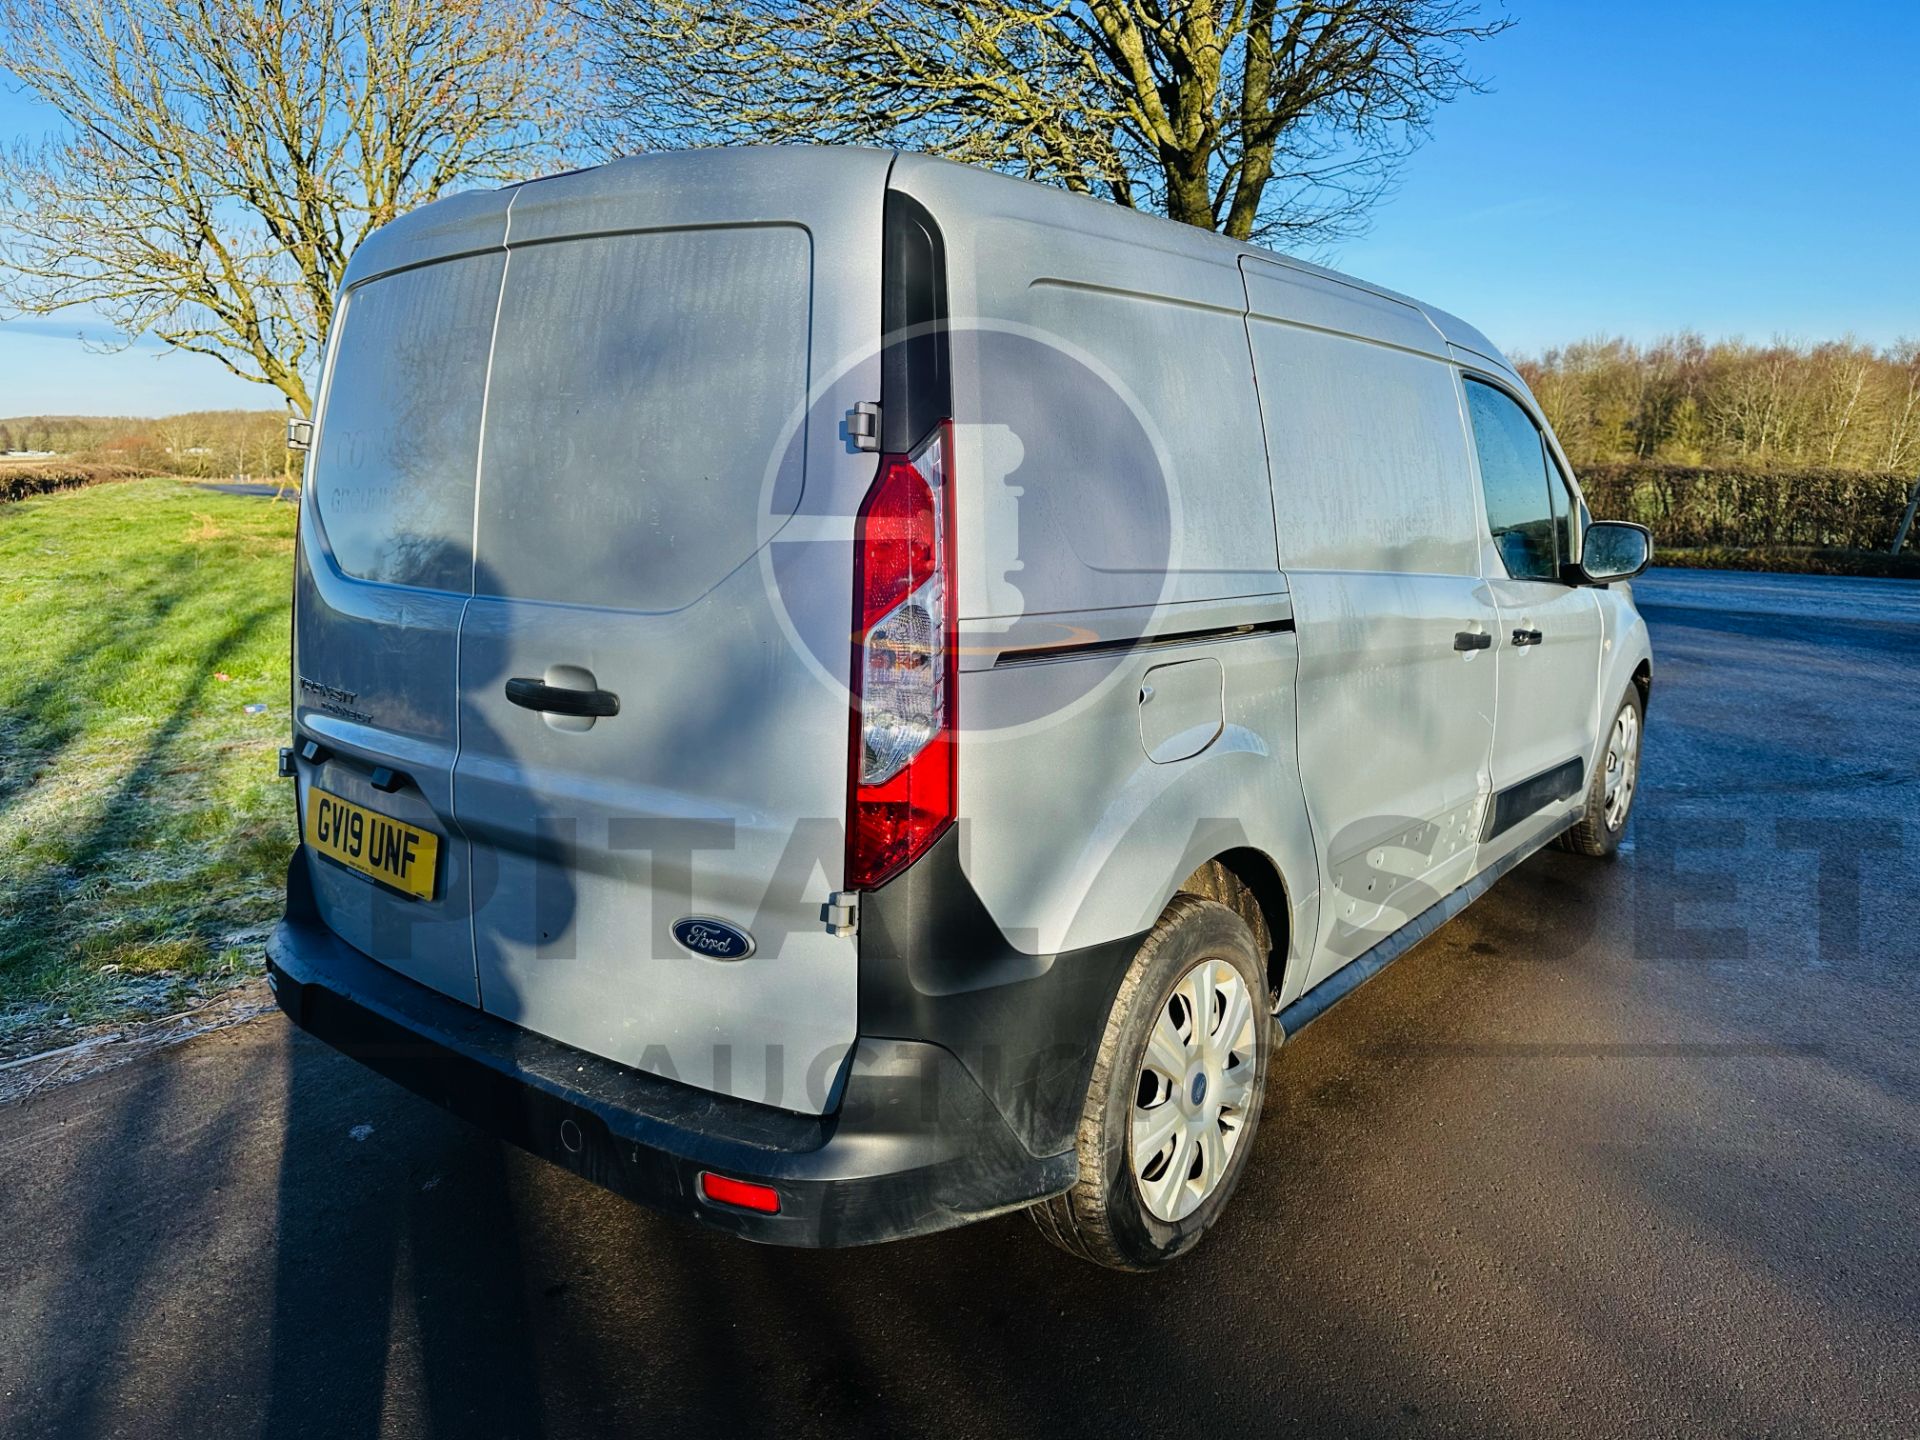 (ON SALE) FORD TRANSIT CONNECT 1.5 Tdci LWB 5 SEAT CREW VAN "EURO 6" - AIR CON - SILVER - 19 REG - Image 9 of 29